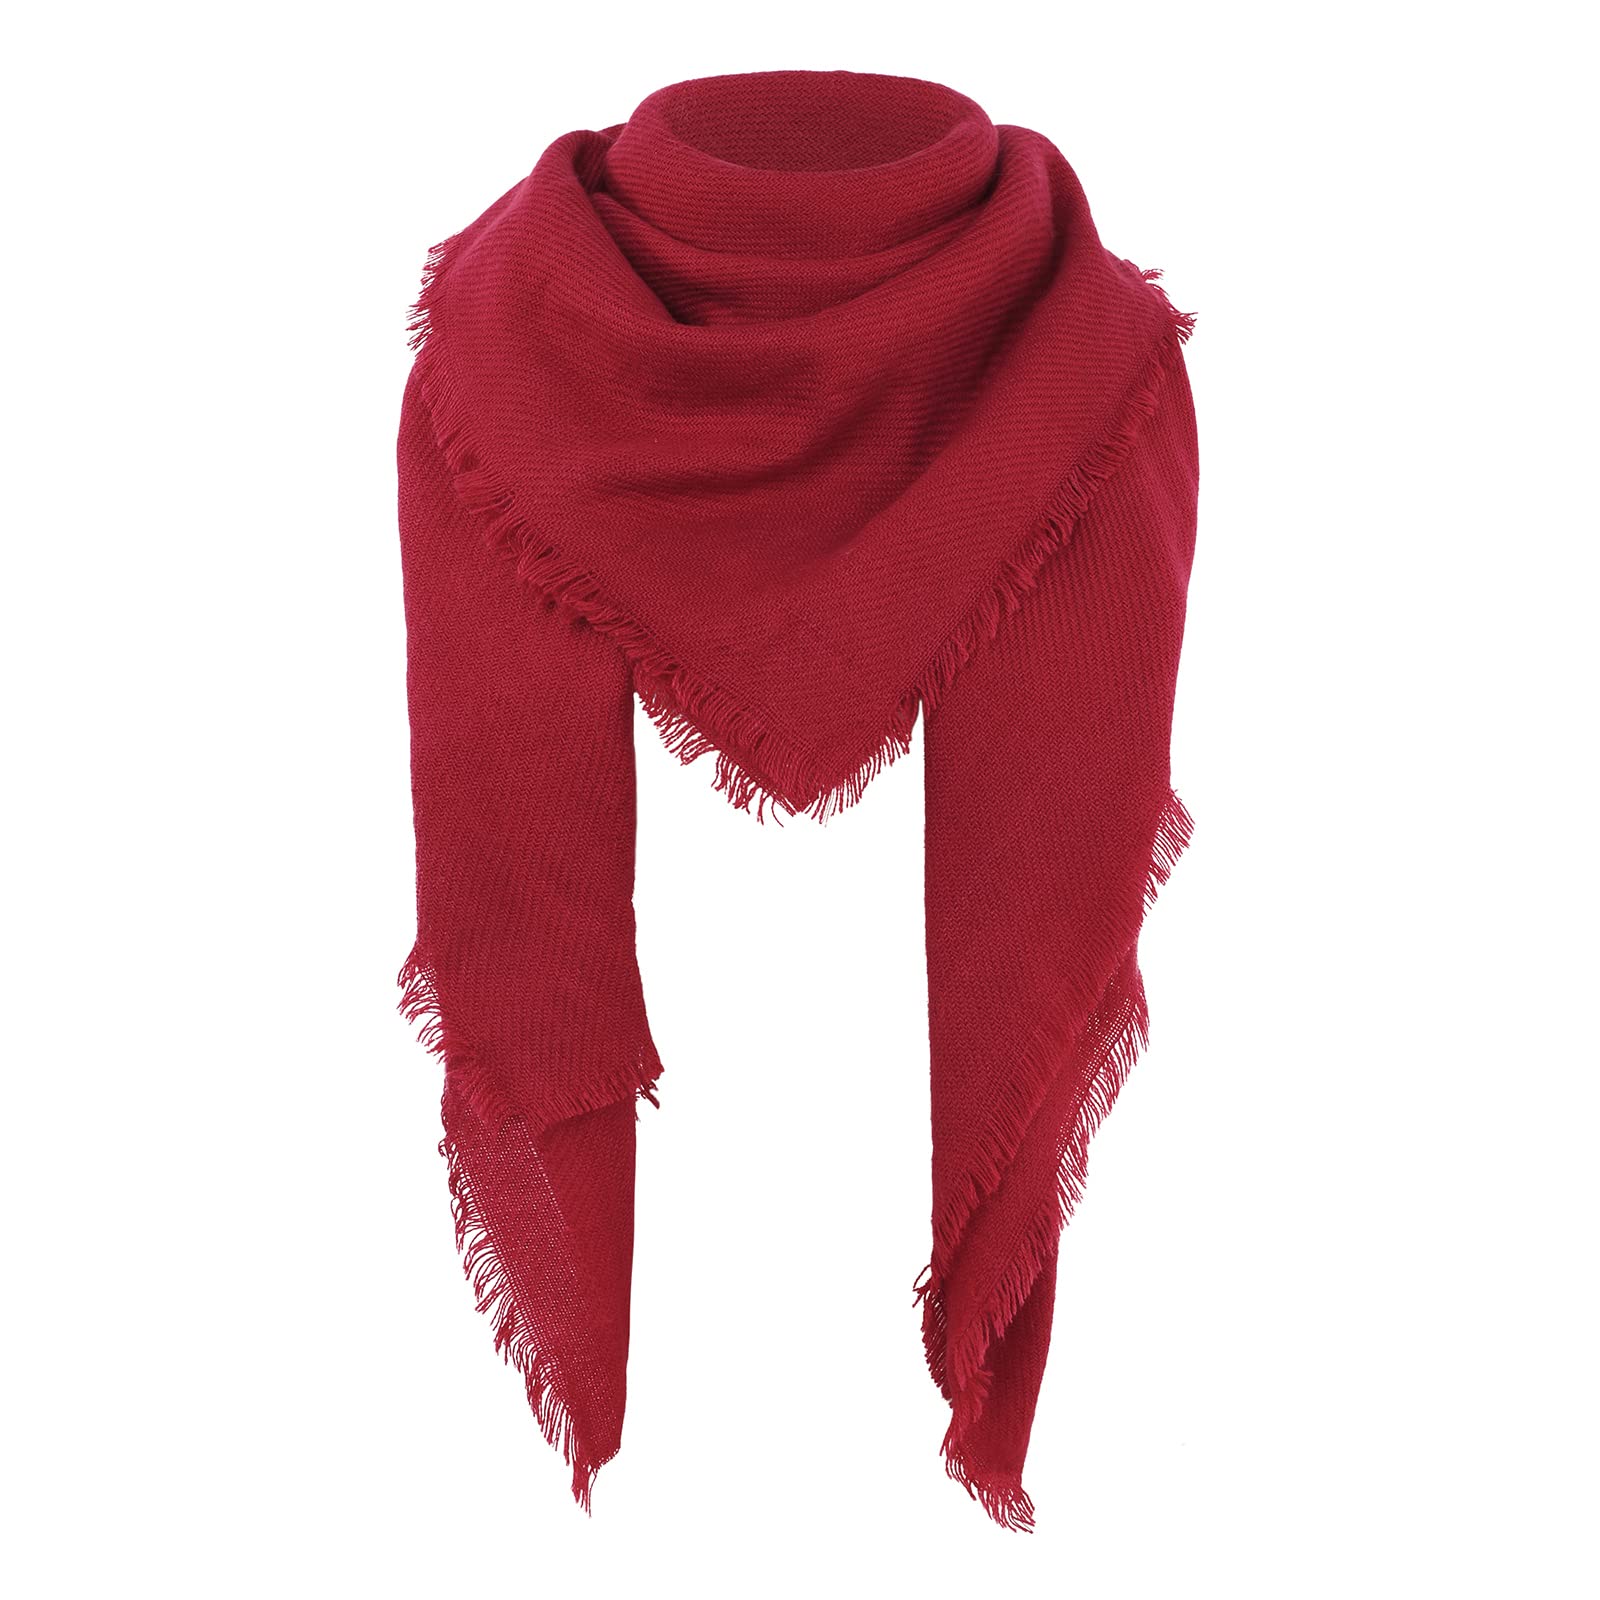 American Trends Womens Blanket Scarf Winter Warm Fashion Shawls Christmas Gifts Solid Red